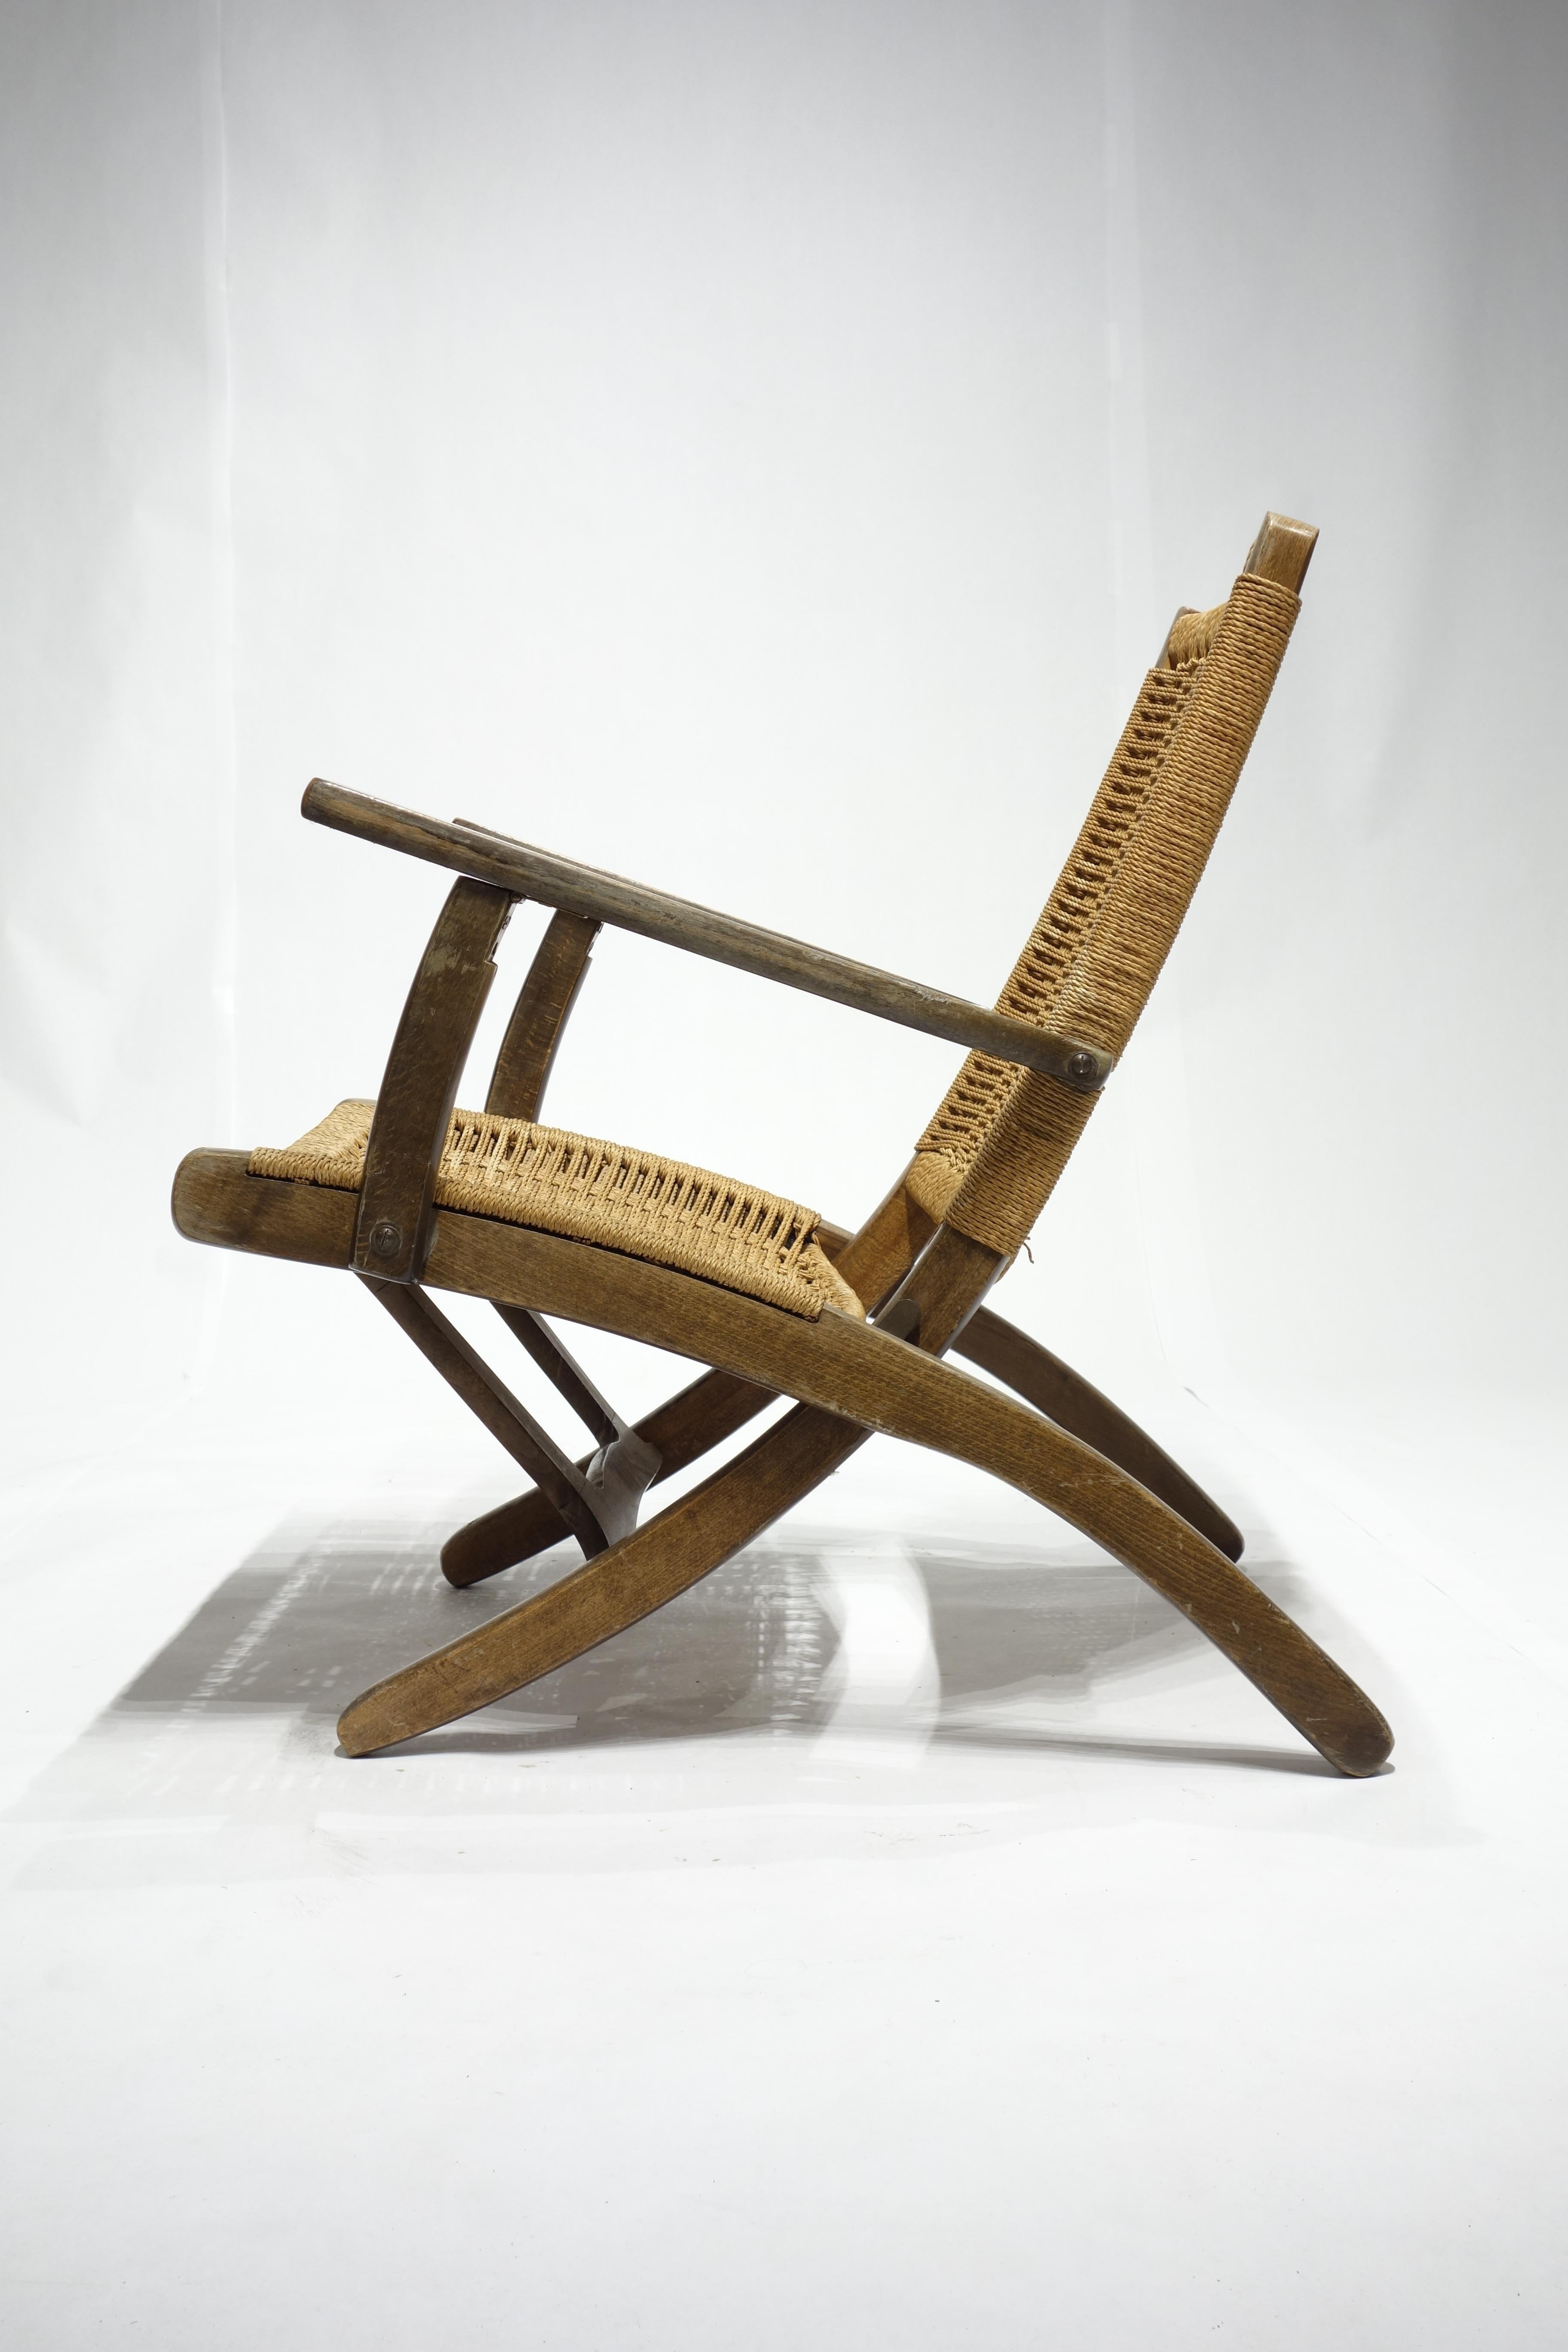 American 20th Century, Woven Rope Loungers